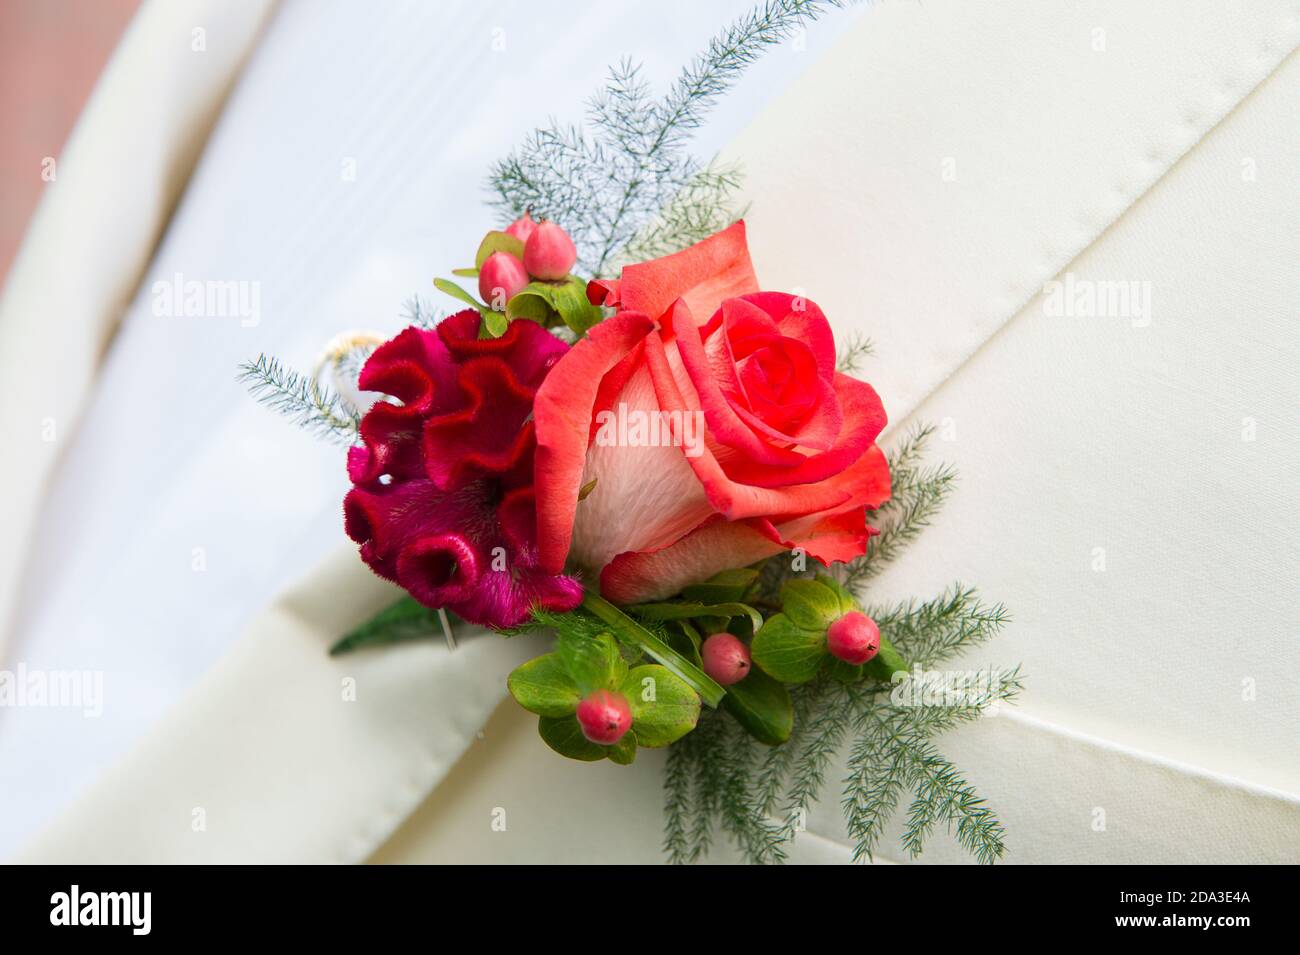 Red rose buttonhole being worn on a gentleman's lapel at a wedding. Stock Photo